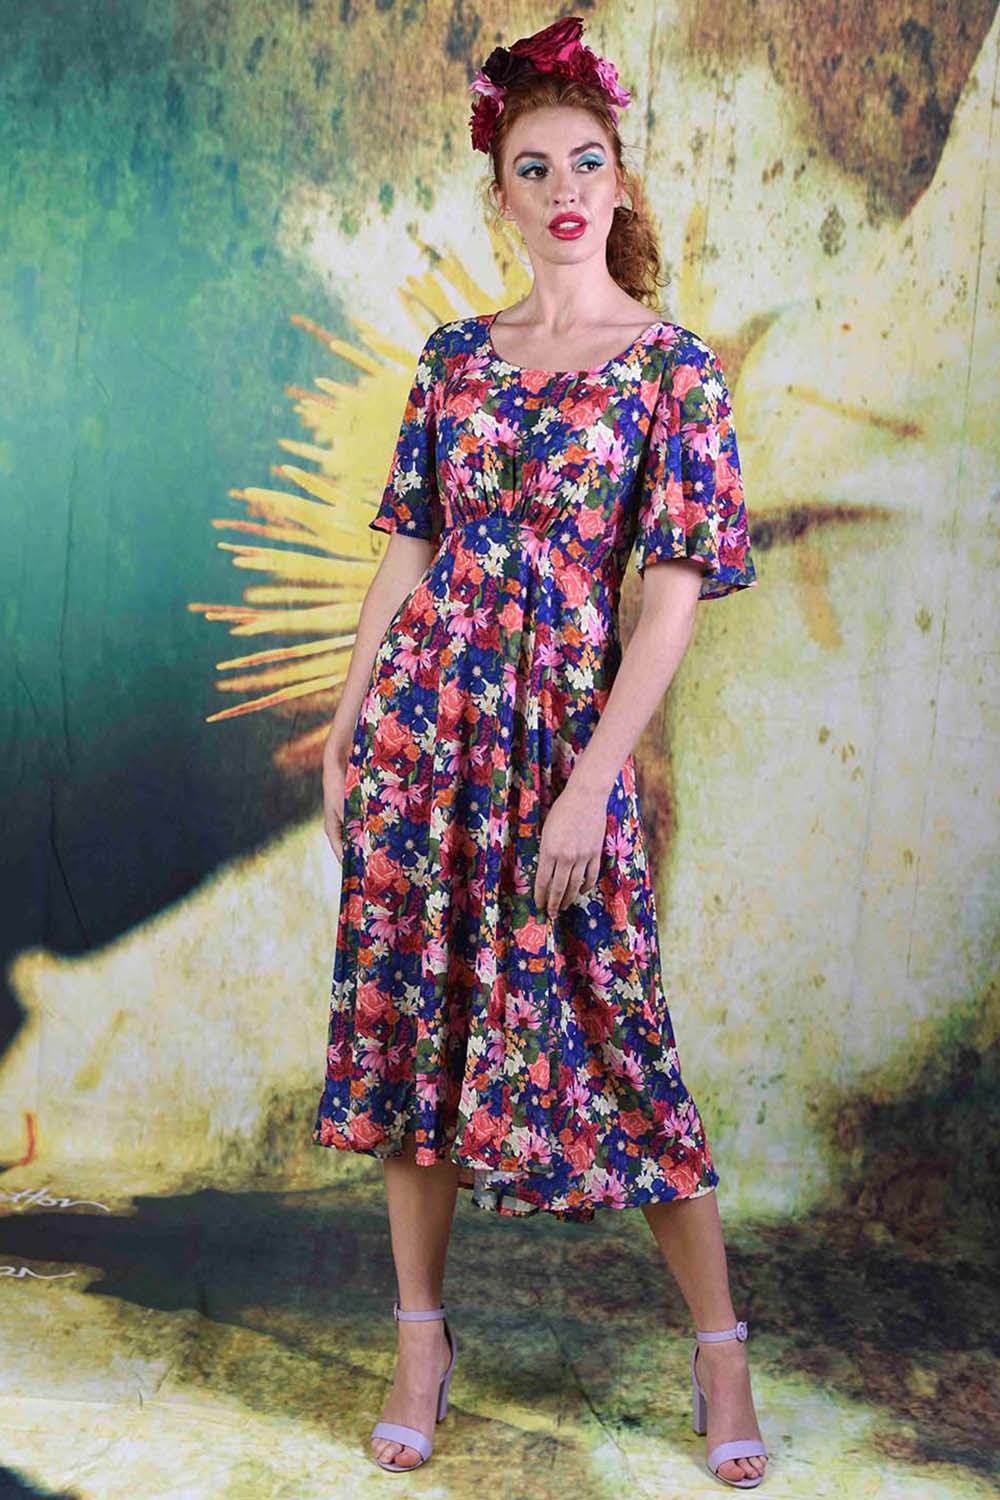 Model wearing the Echinacea Down the Line dress by Annah Stretton